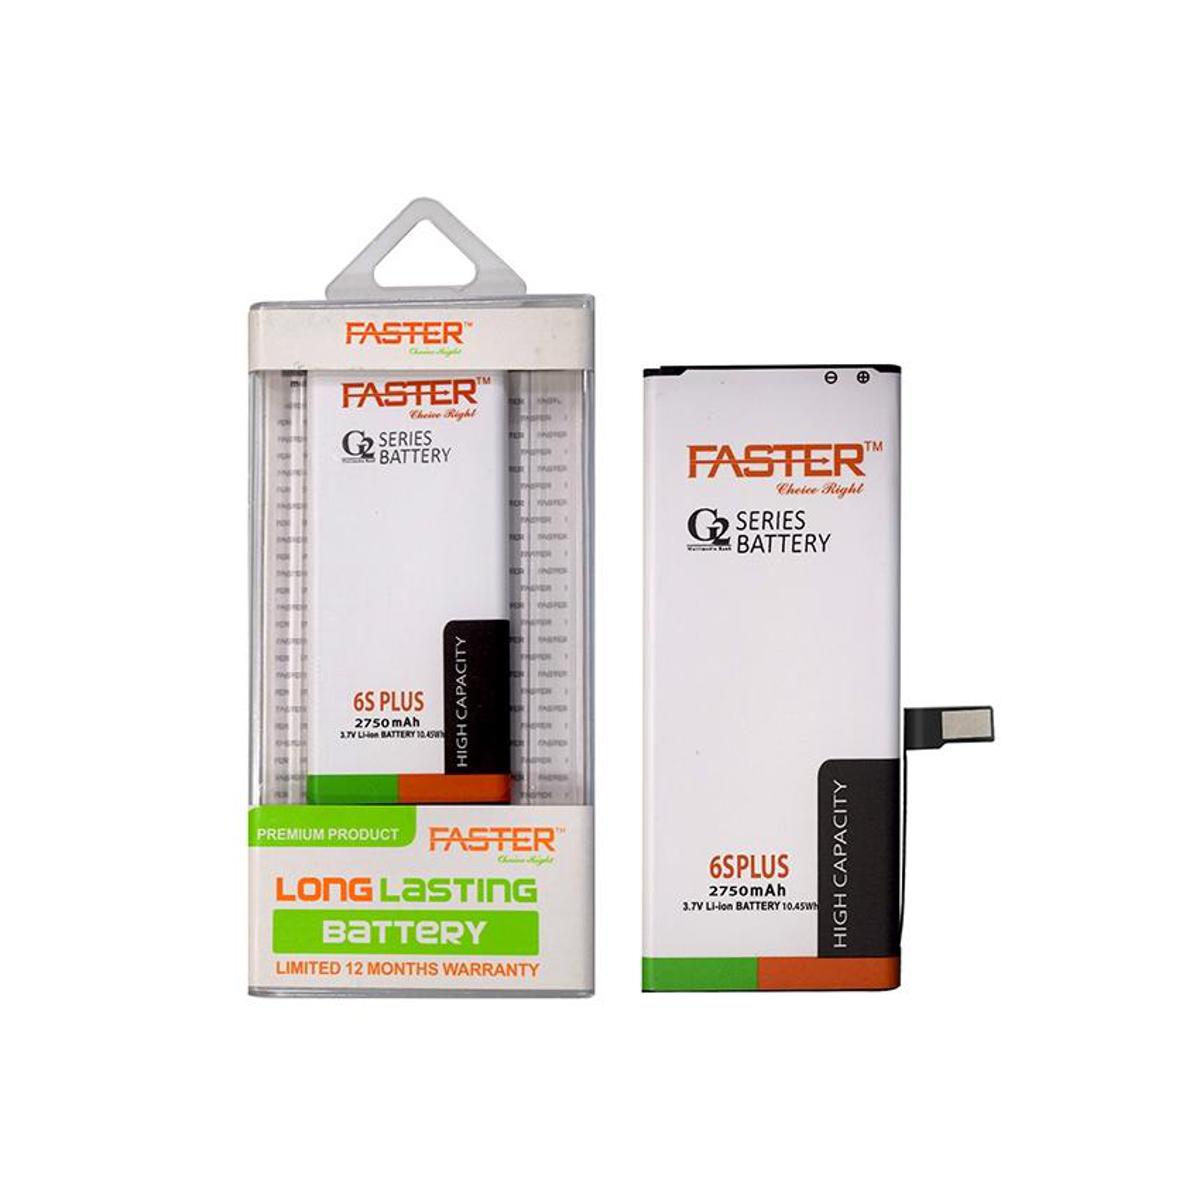 FASTER G2 Series Long Lasting Battery For iPHONE 6S Plus 2750 mAh